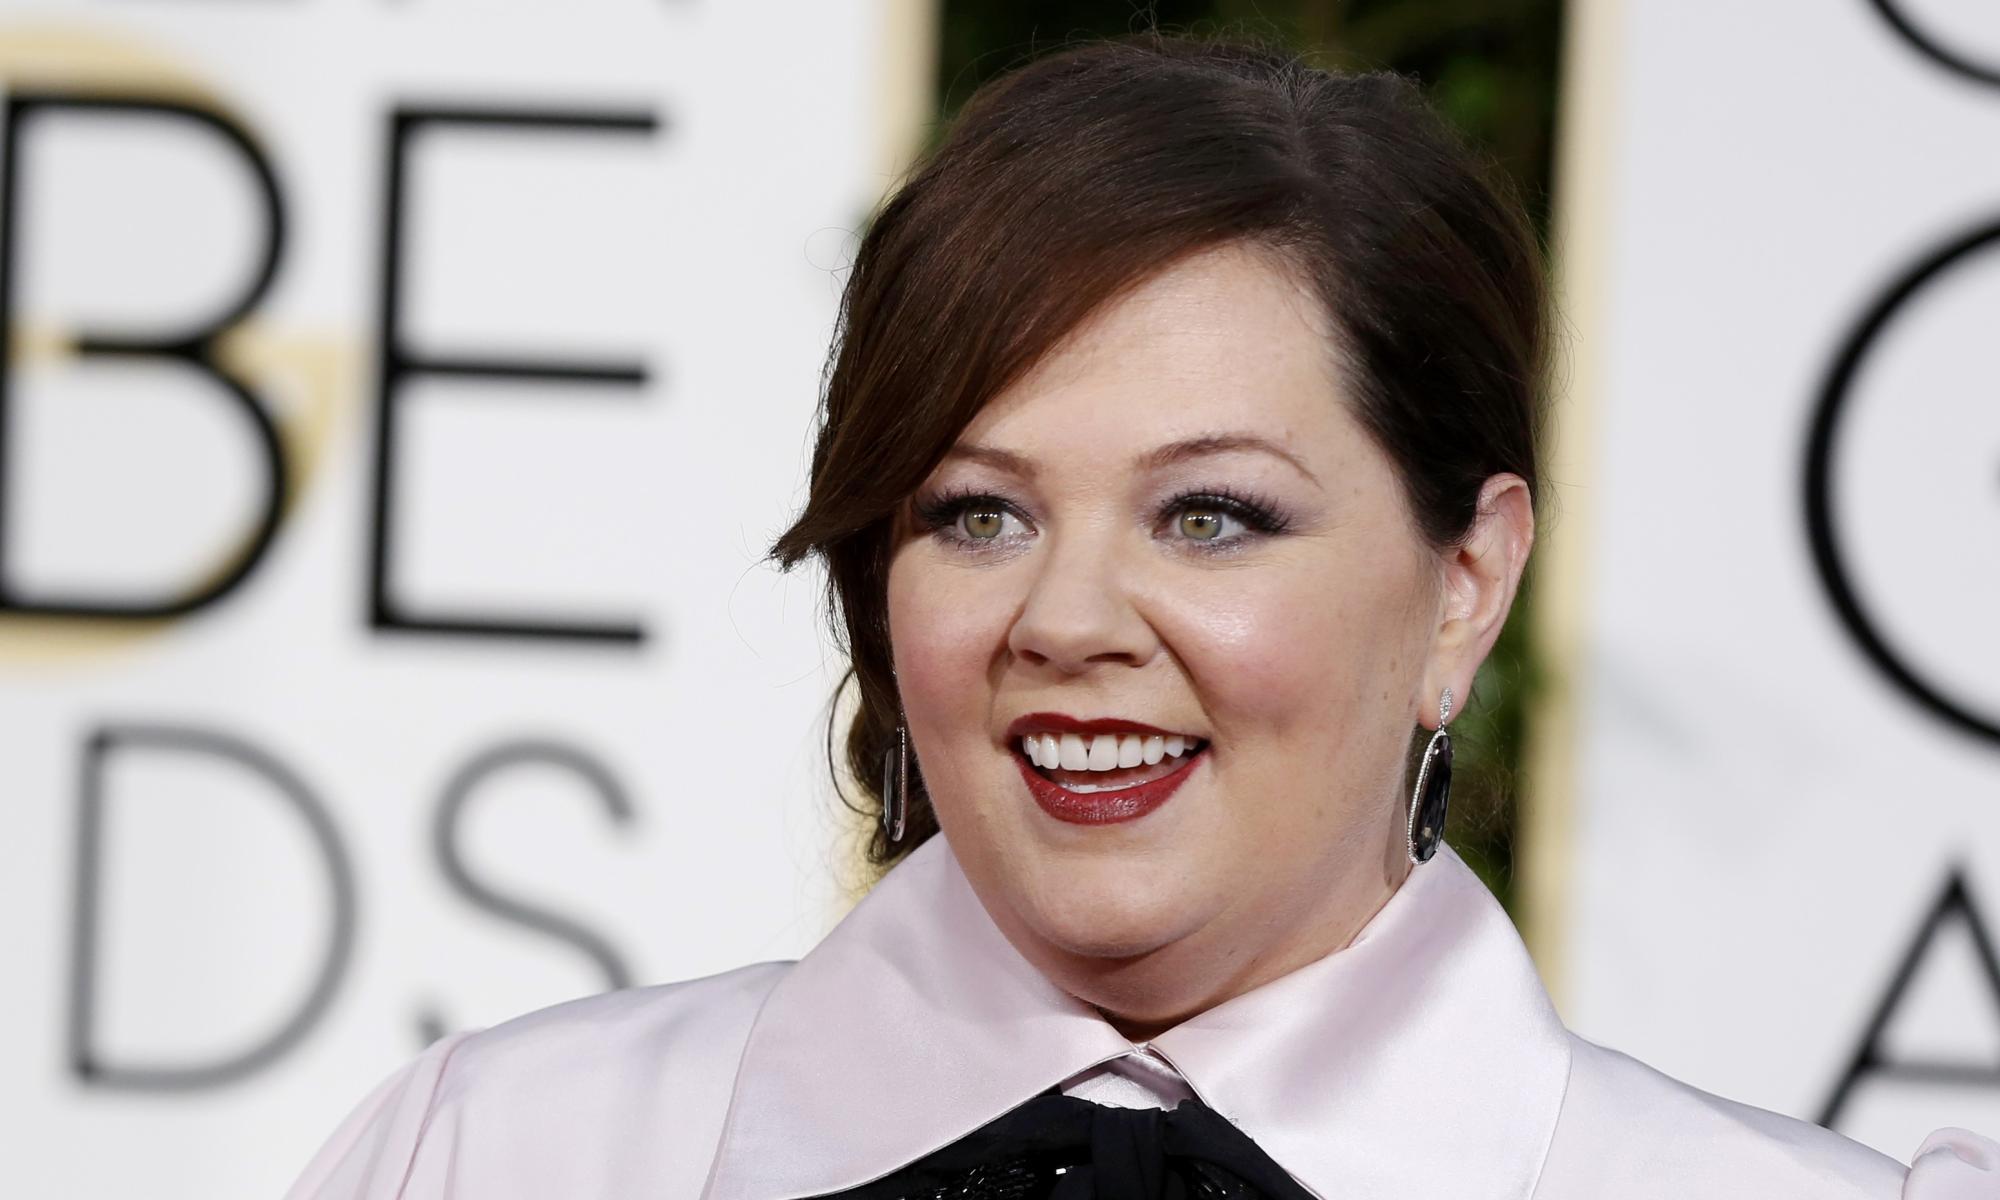 Melissa Mccarthy Hairstyle Wallpaper 60639 2000x1200 px